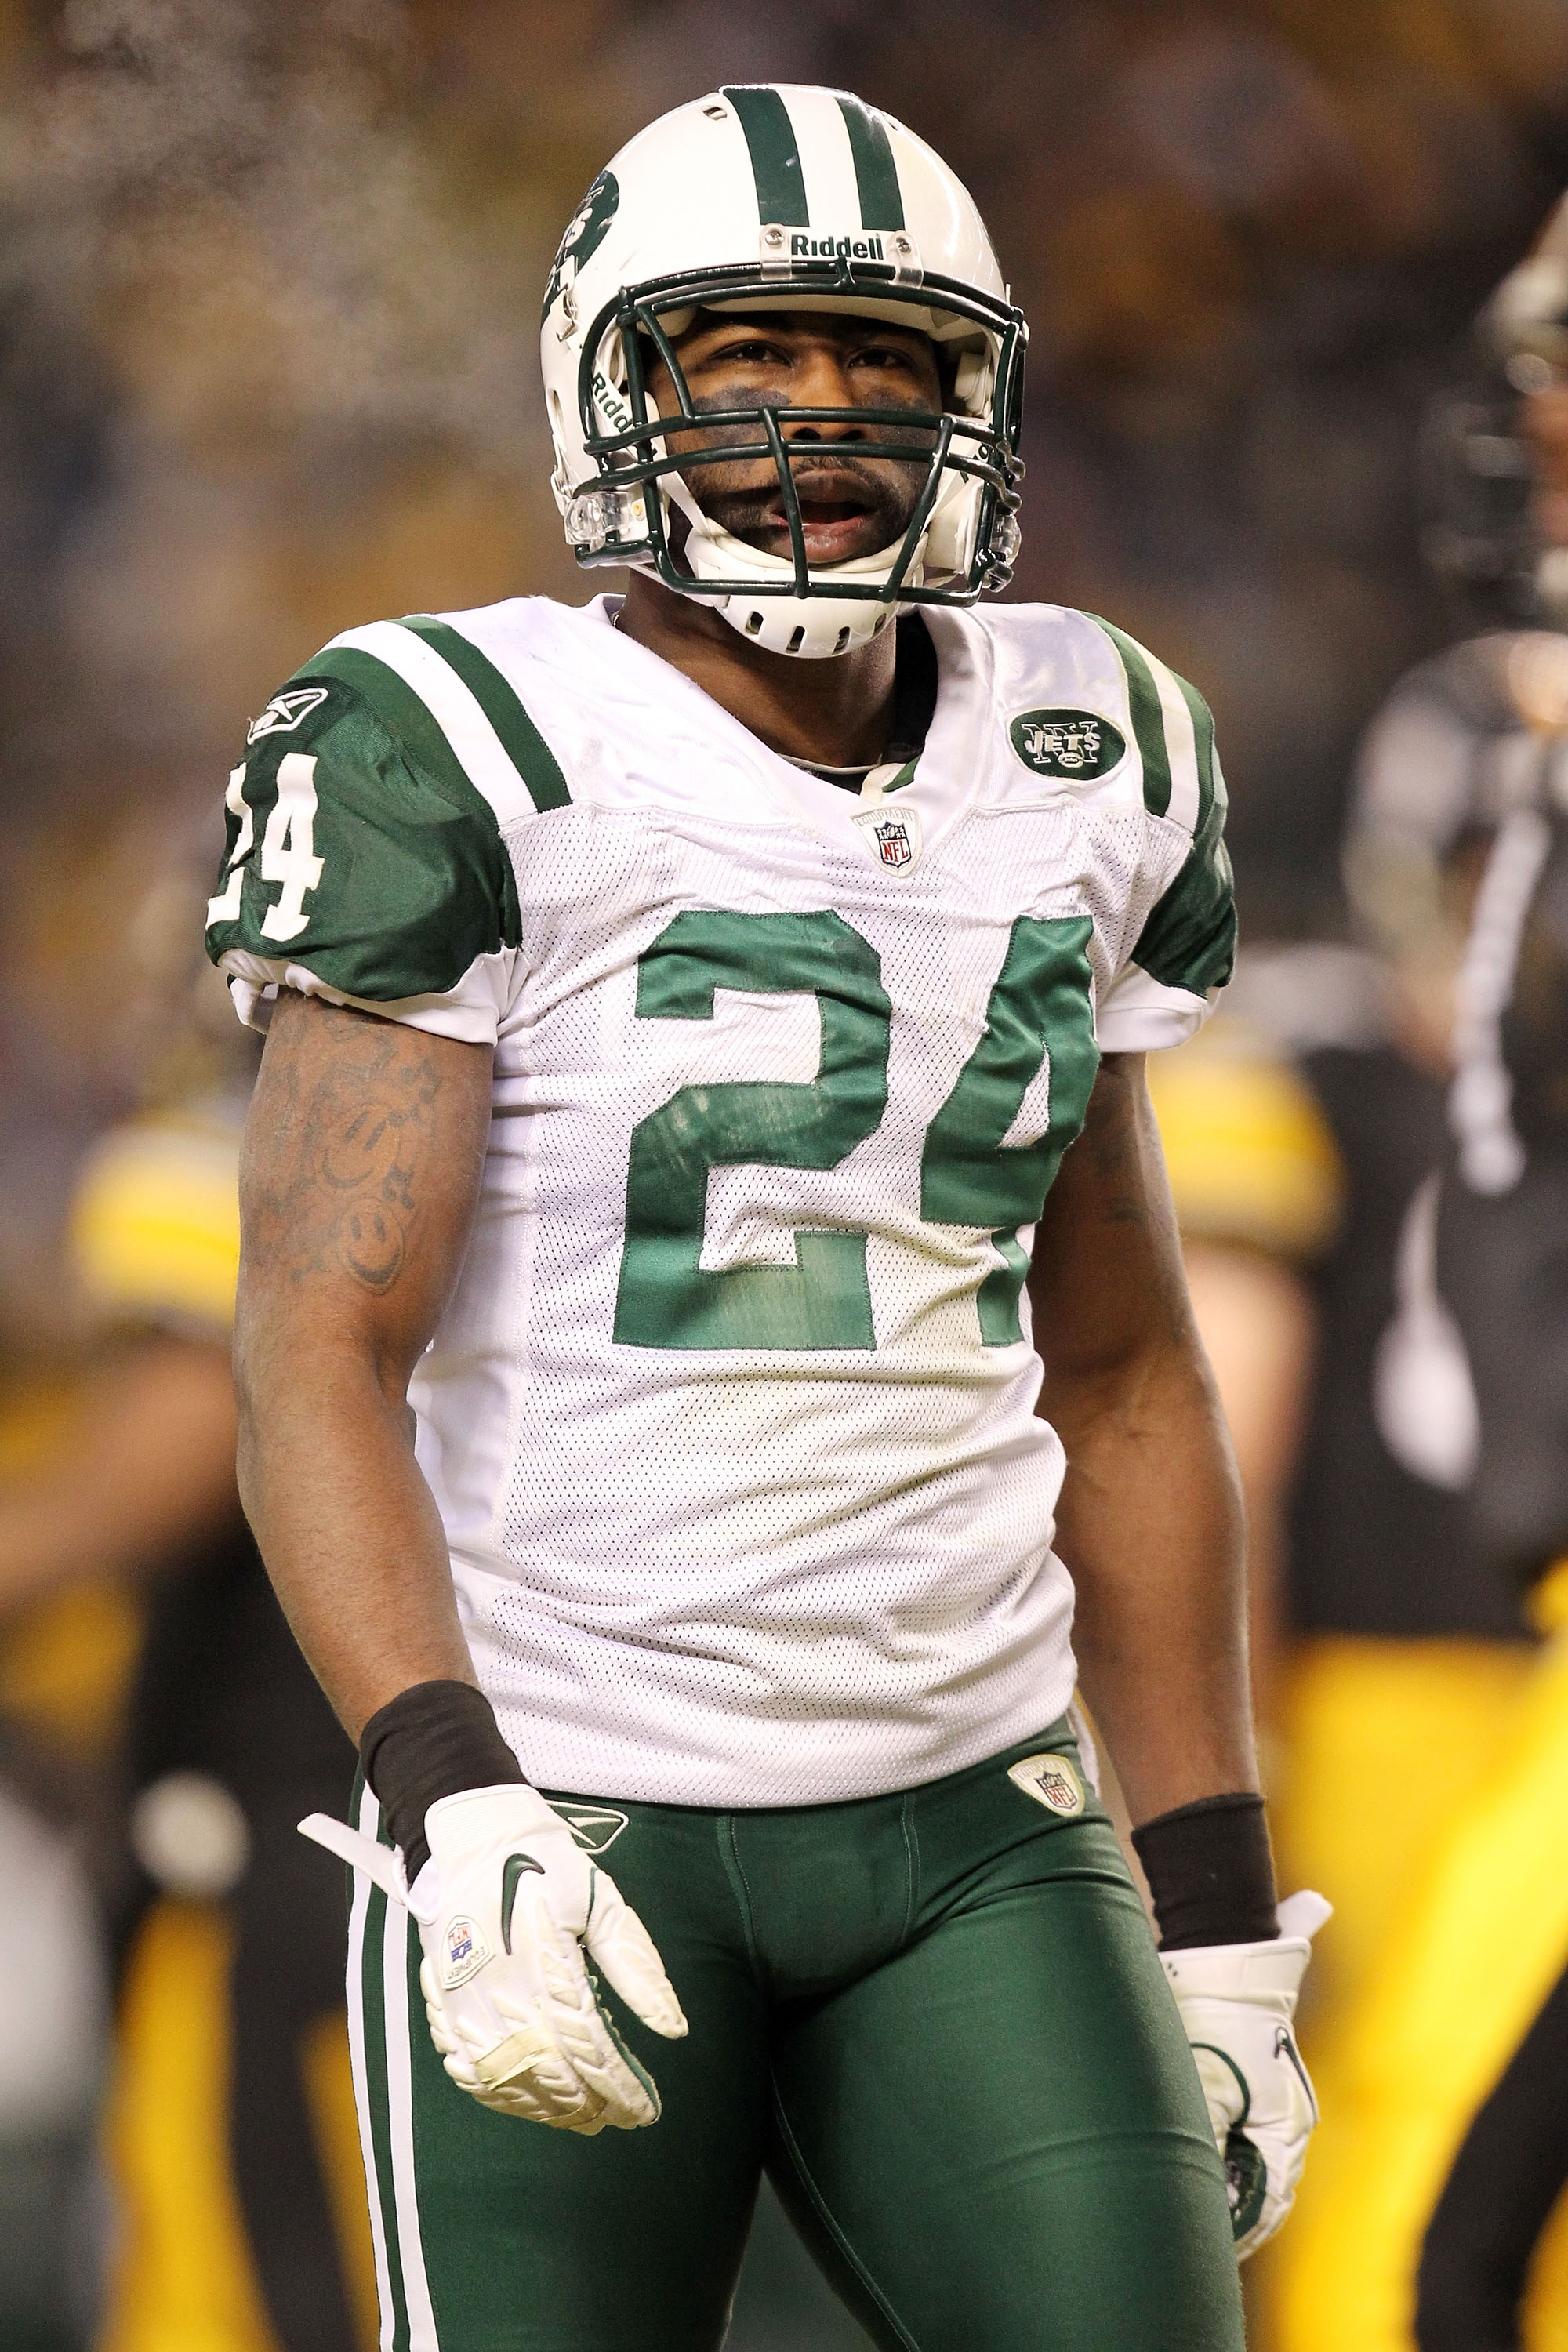 PITTSBURGH, PA - JANUARY 23:  Darrelle Revis #24 of the New York Jets reacts during their 19 to 24 loss to the Pittsburgh Steelers in the 2011 AFC Championship game at Heinz Field on January 23, 2011 in Pittsburgh, Pennsylvania.  (Photo by Ronald Martinez